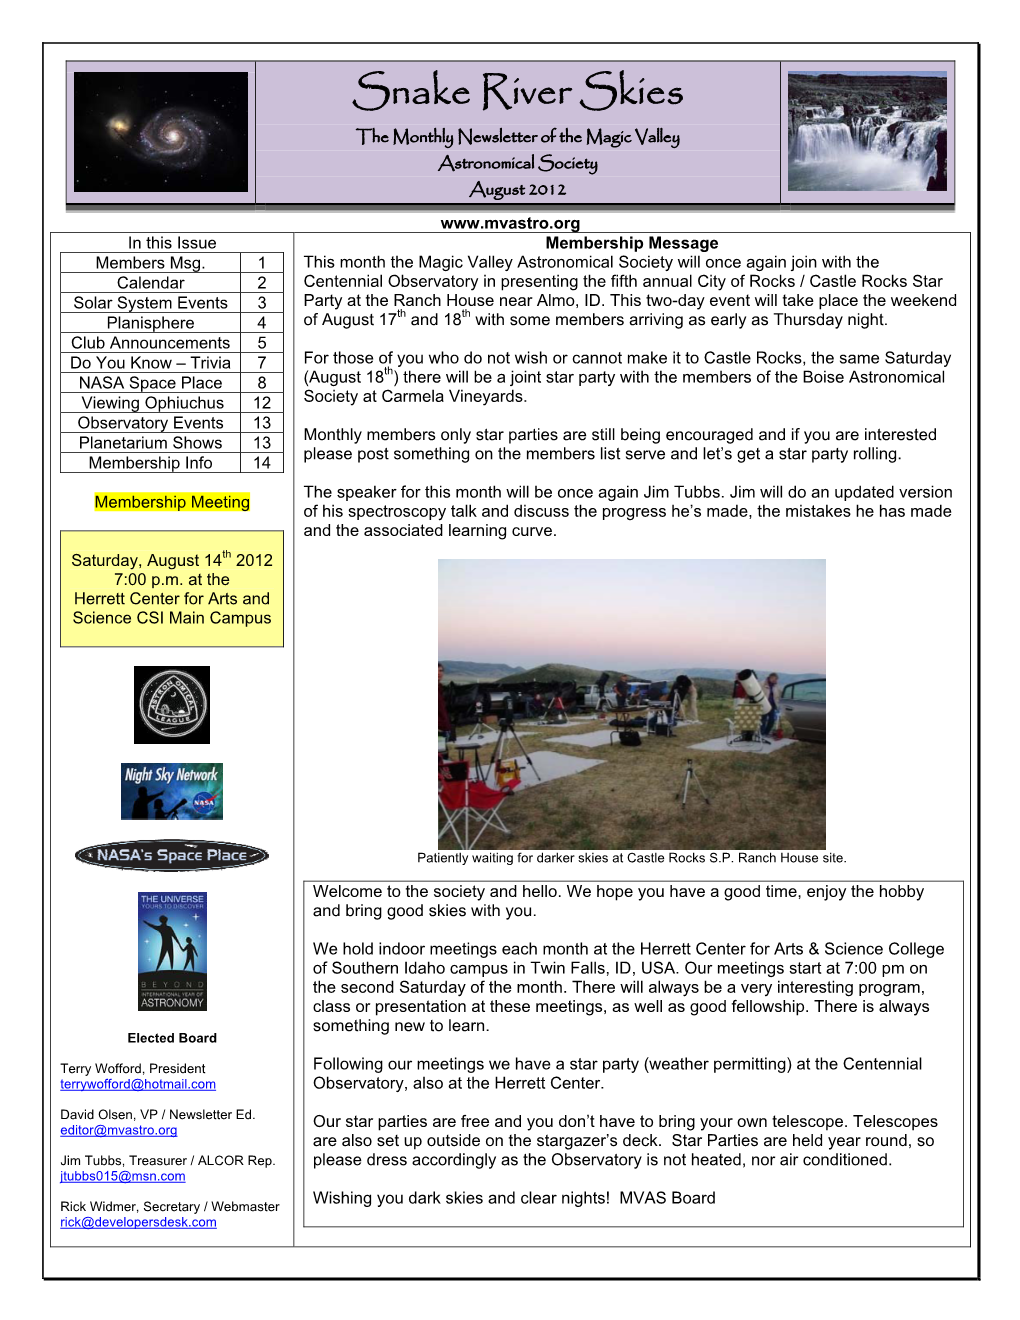 Snake River Skies the Monthly Newsletter of the Magic Valley Astronomical Society August 2012 in This Issue Membership Message Members Msg